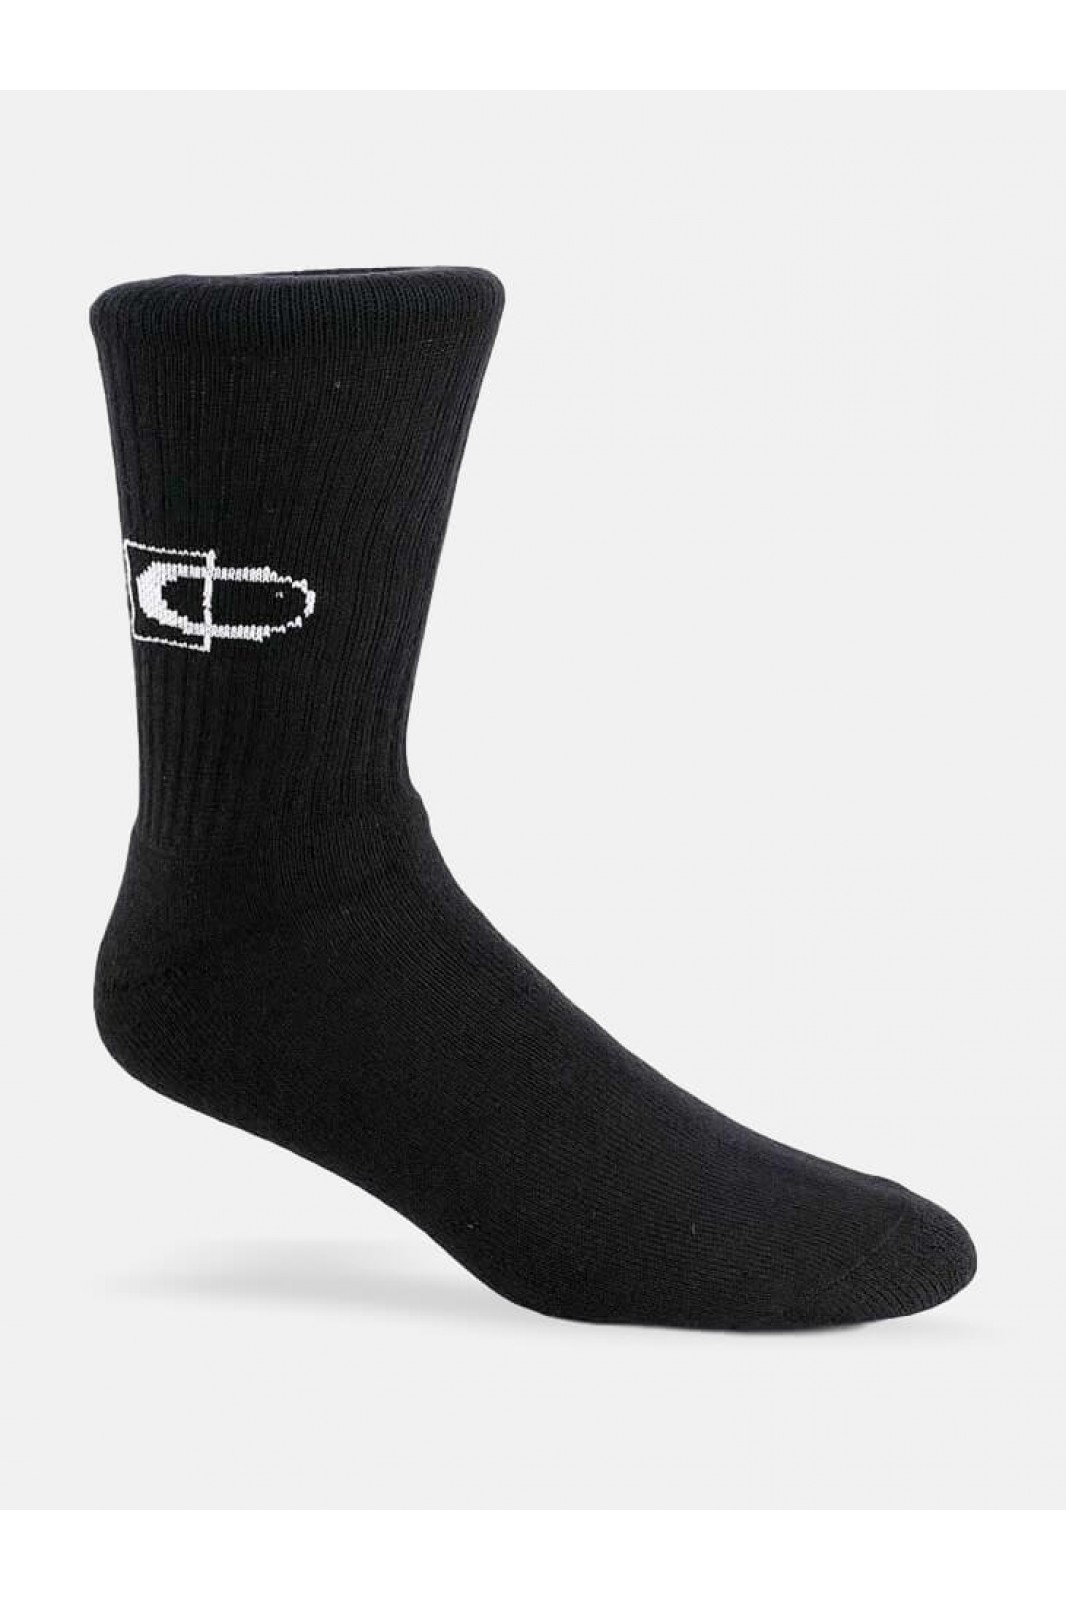 Mens Sports Socks ULTRASOX - terry towel with design 